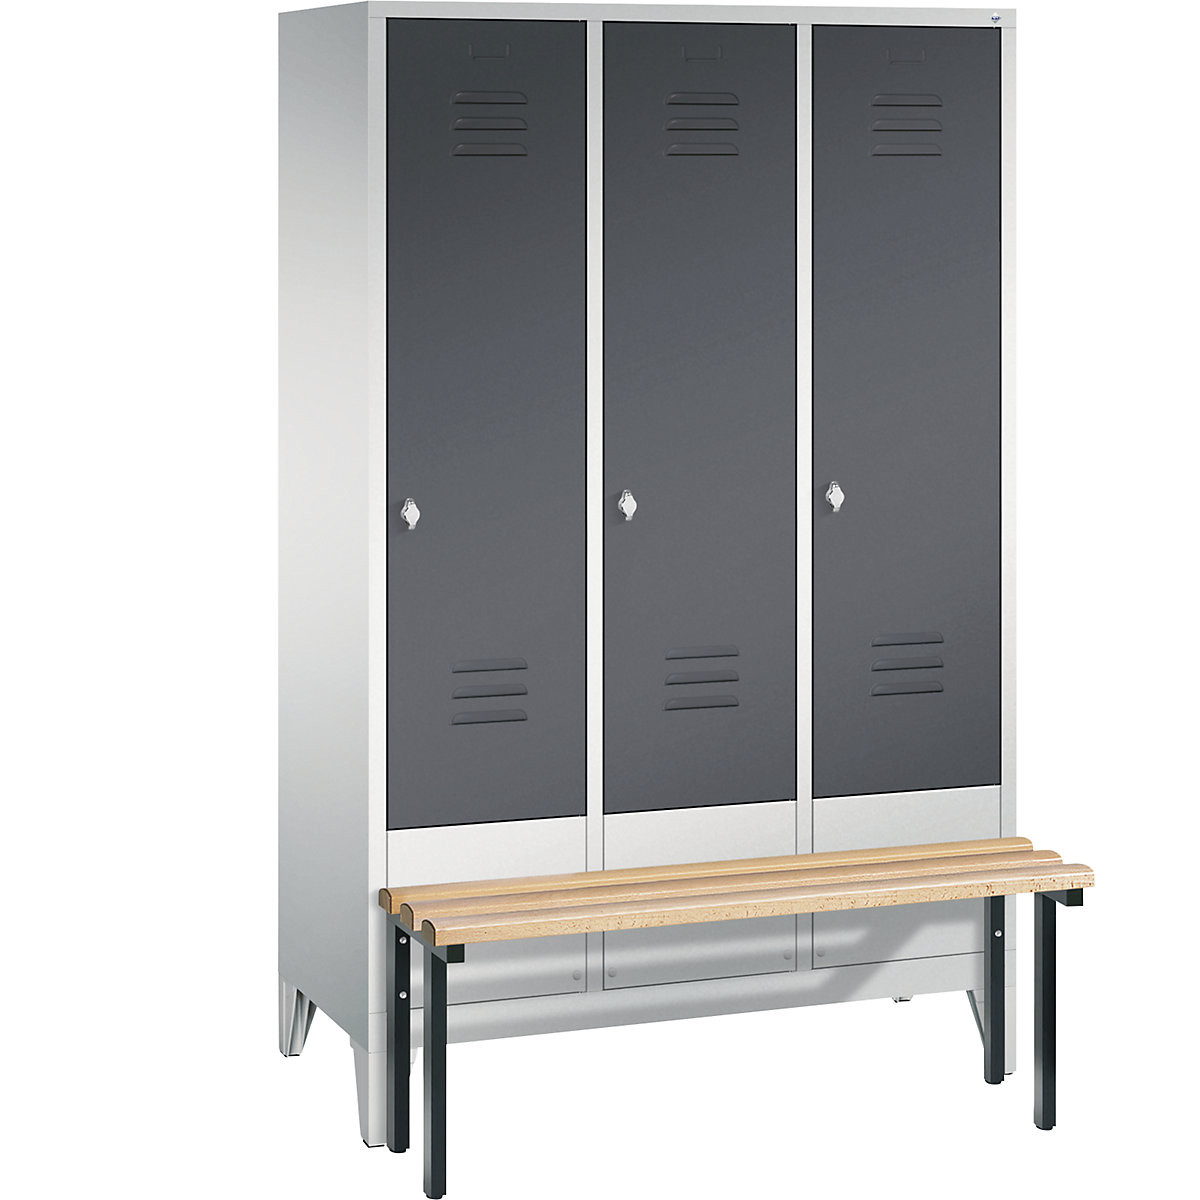 CLASSIC cloakroom locker with bench mounted in front – C+P, 3 compartments, compartment width 400 mm, light grey / black grey-13